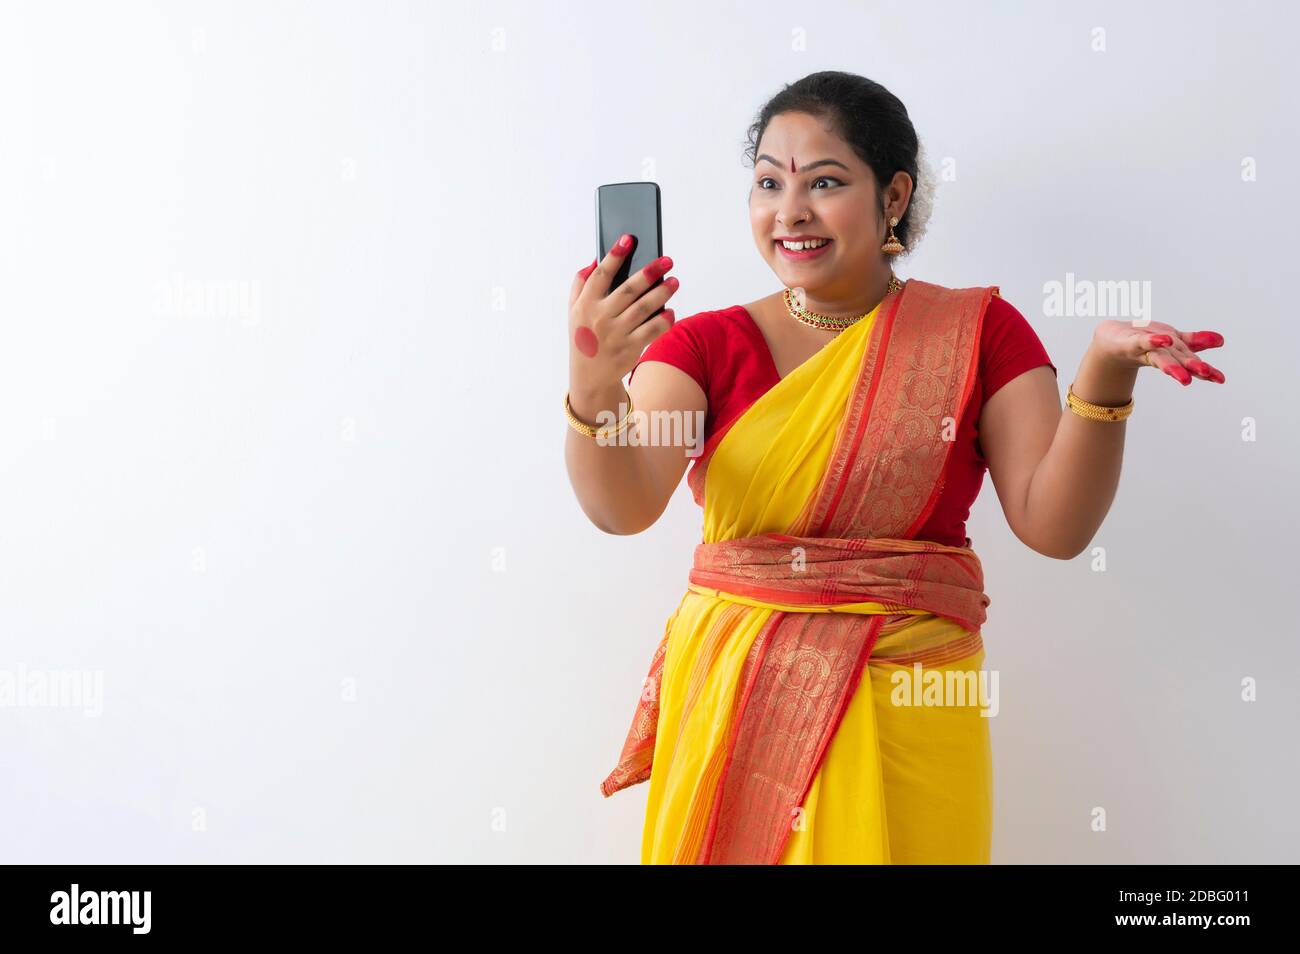 Kuchipudi dancer talking to her friends on videocall Stock Photo